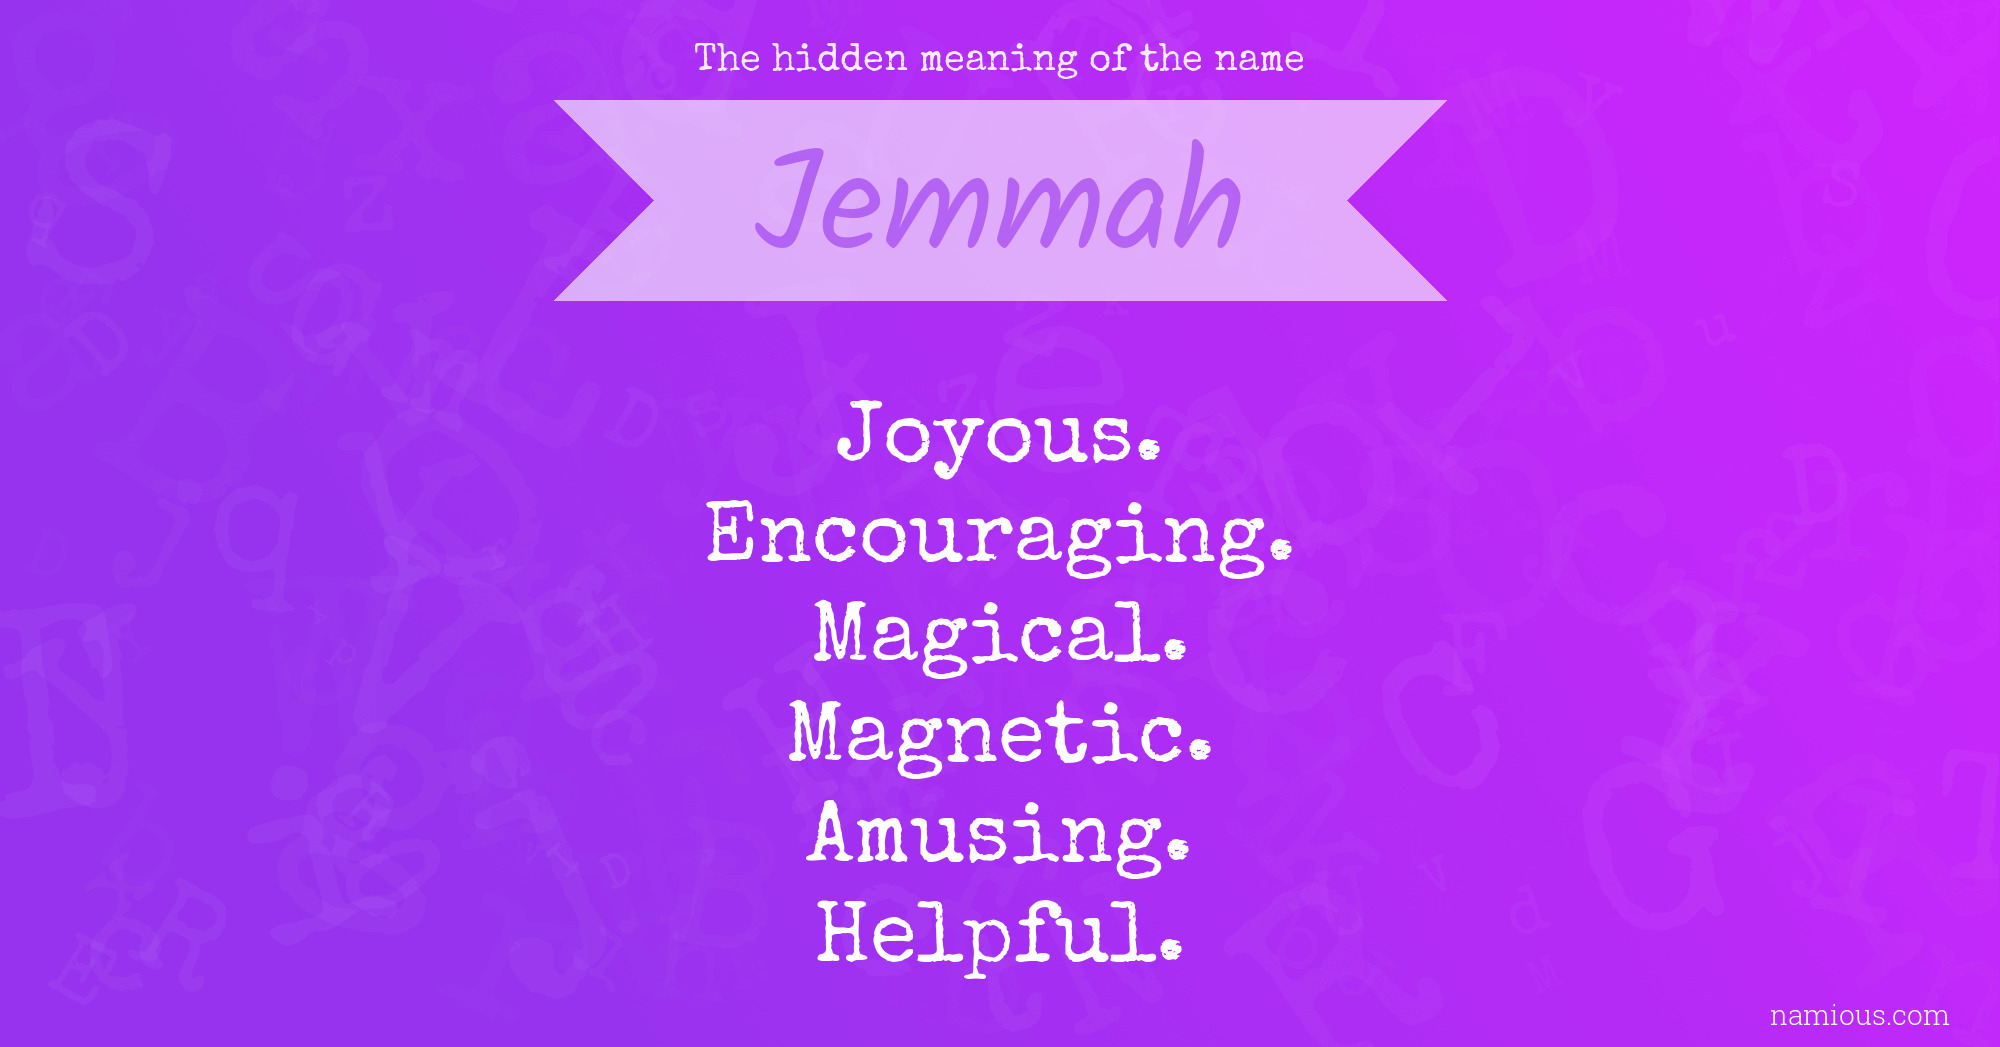 The hidden meaning of the name Jemmah